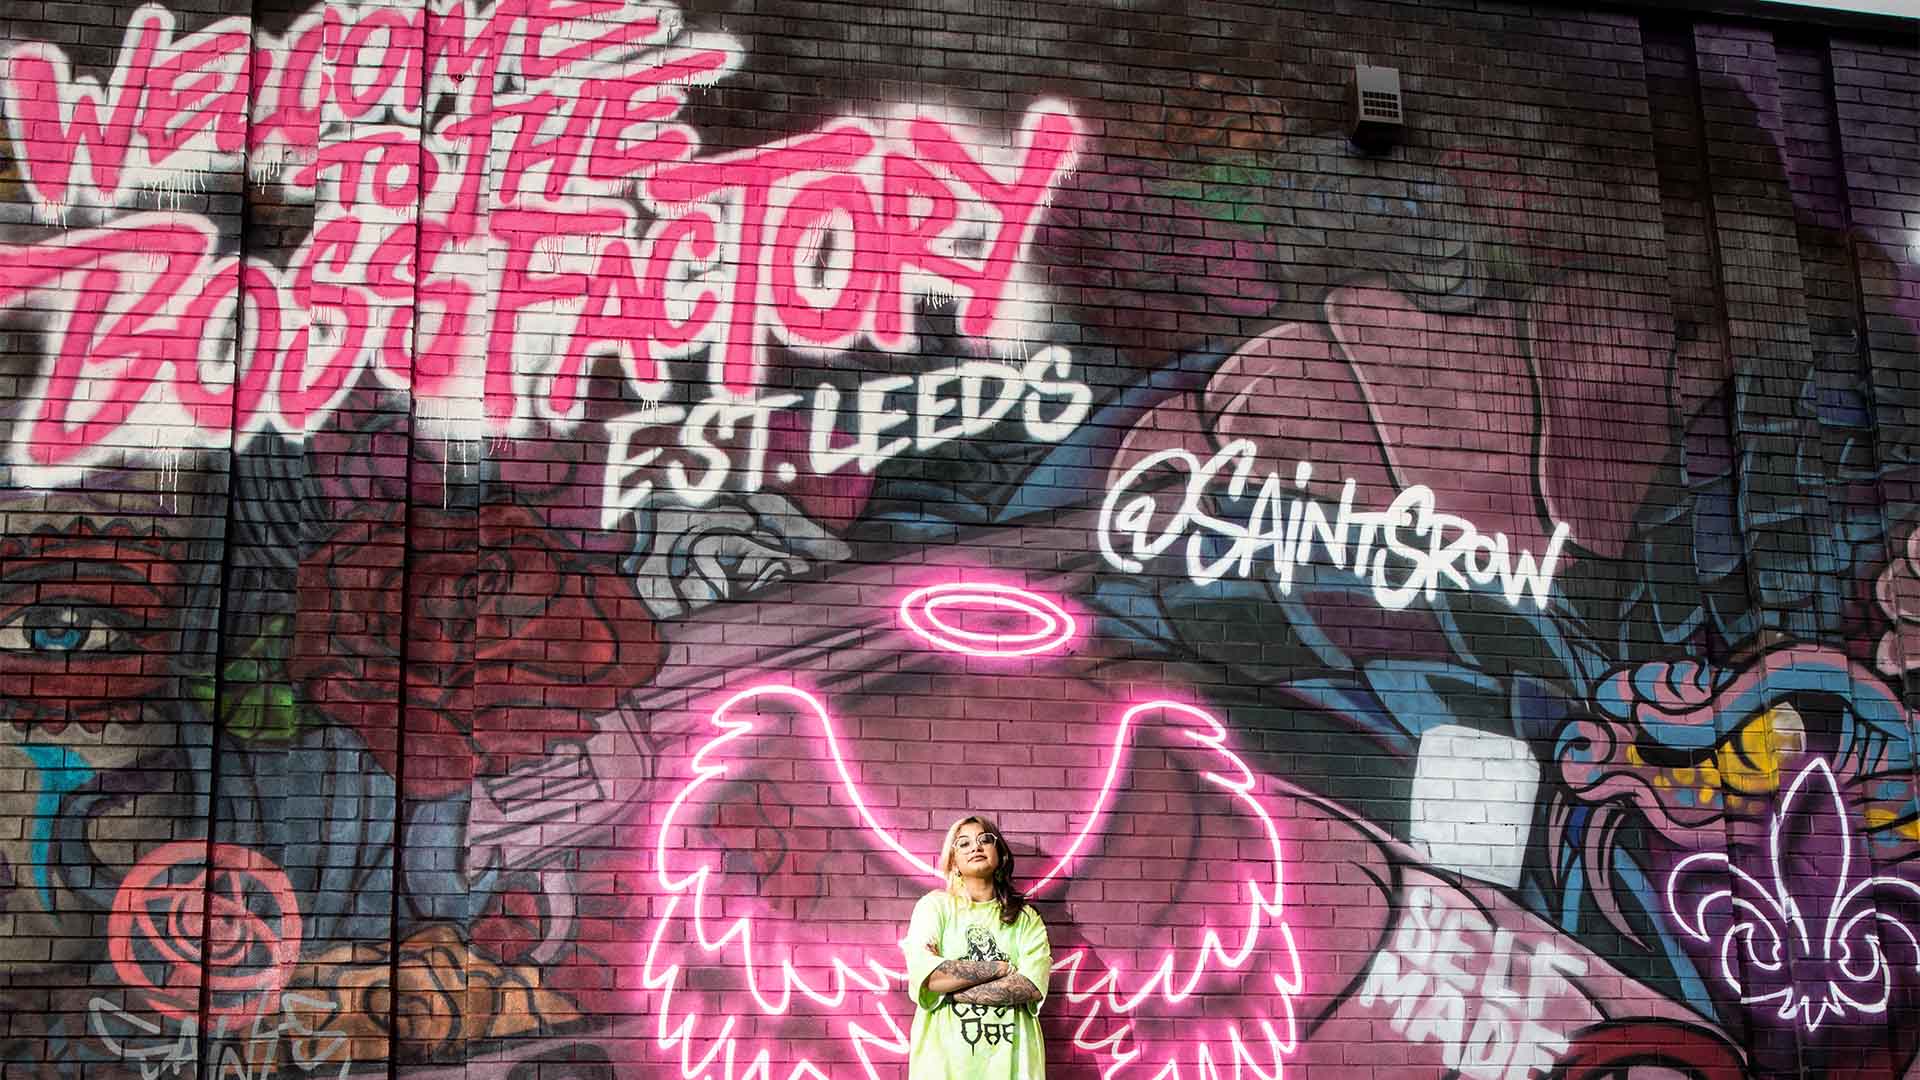 Saints Row mural unveiled in "most ambitious" city in the UK